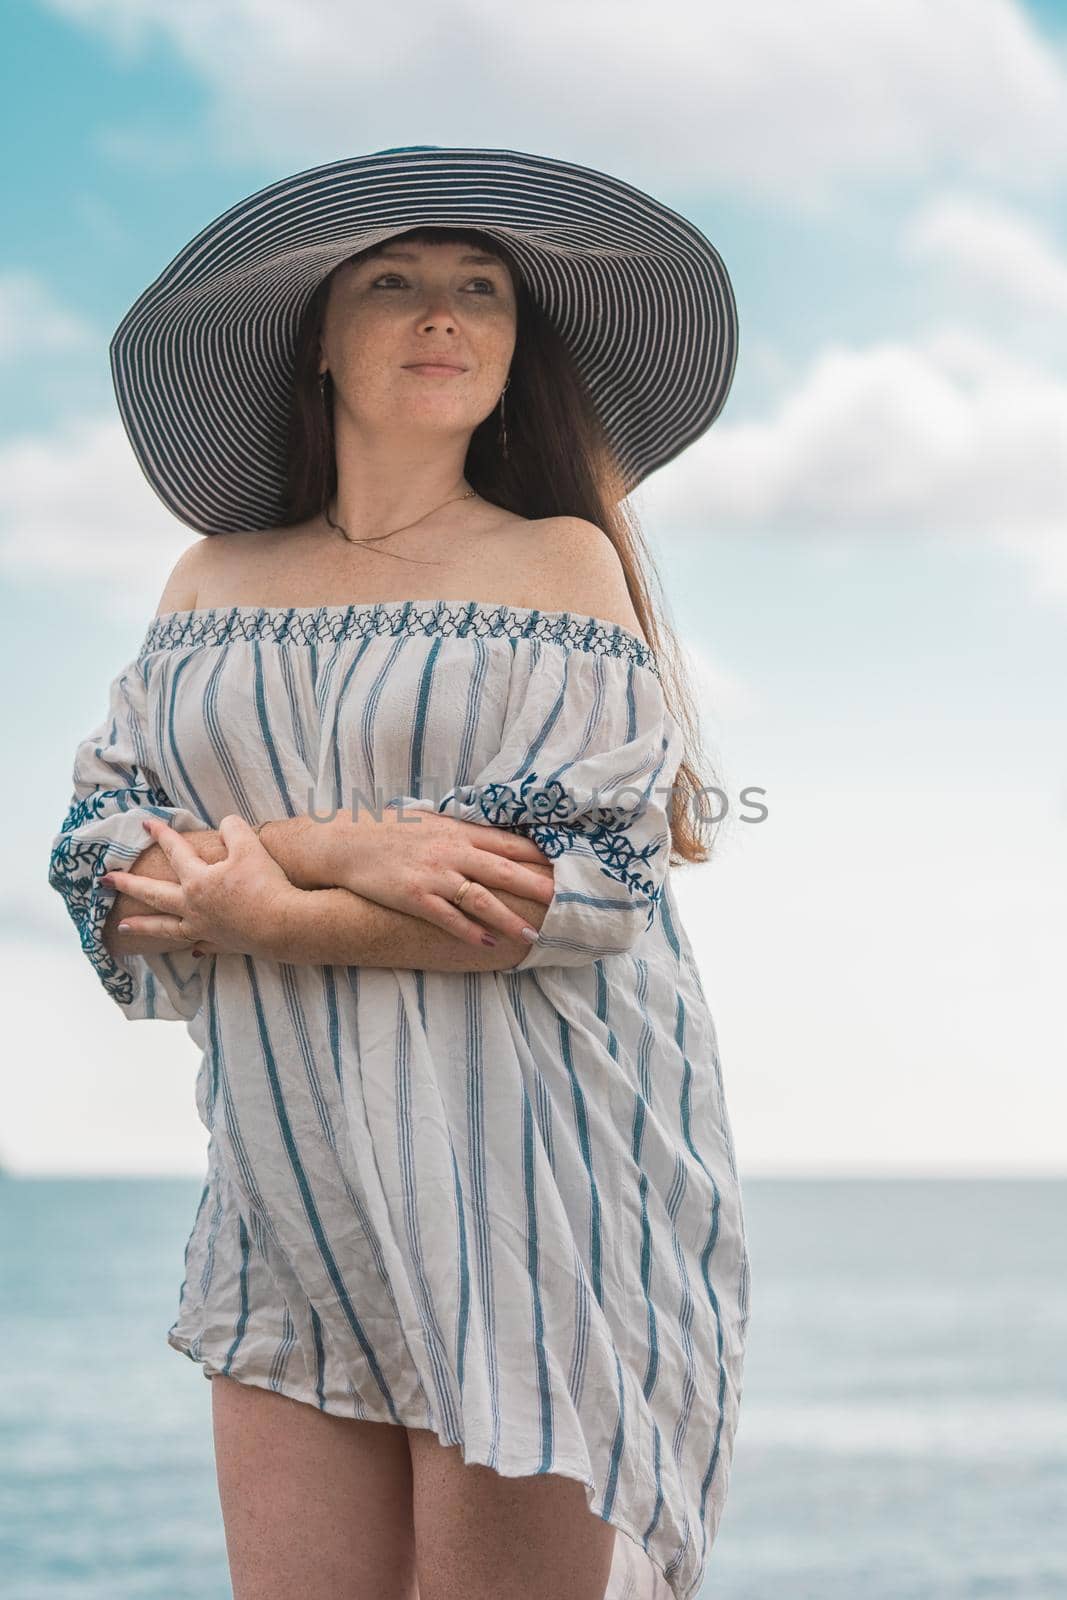 A girl with brown hair and freckles on her face and shoulders in a big blue hat with a large brim and a cape made of cotton fabric on the beach by the sea looks into the distance. Bare shoulders and legs. A slight smile expresses calmness